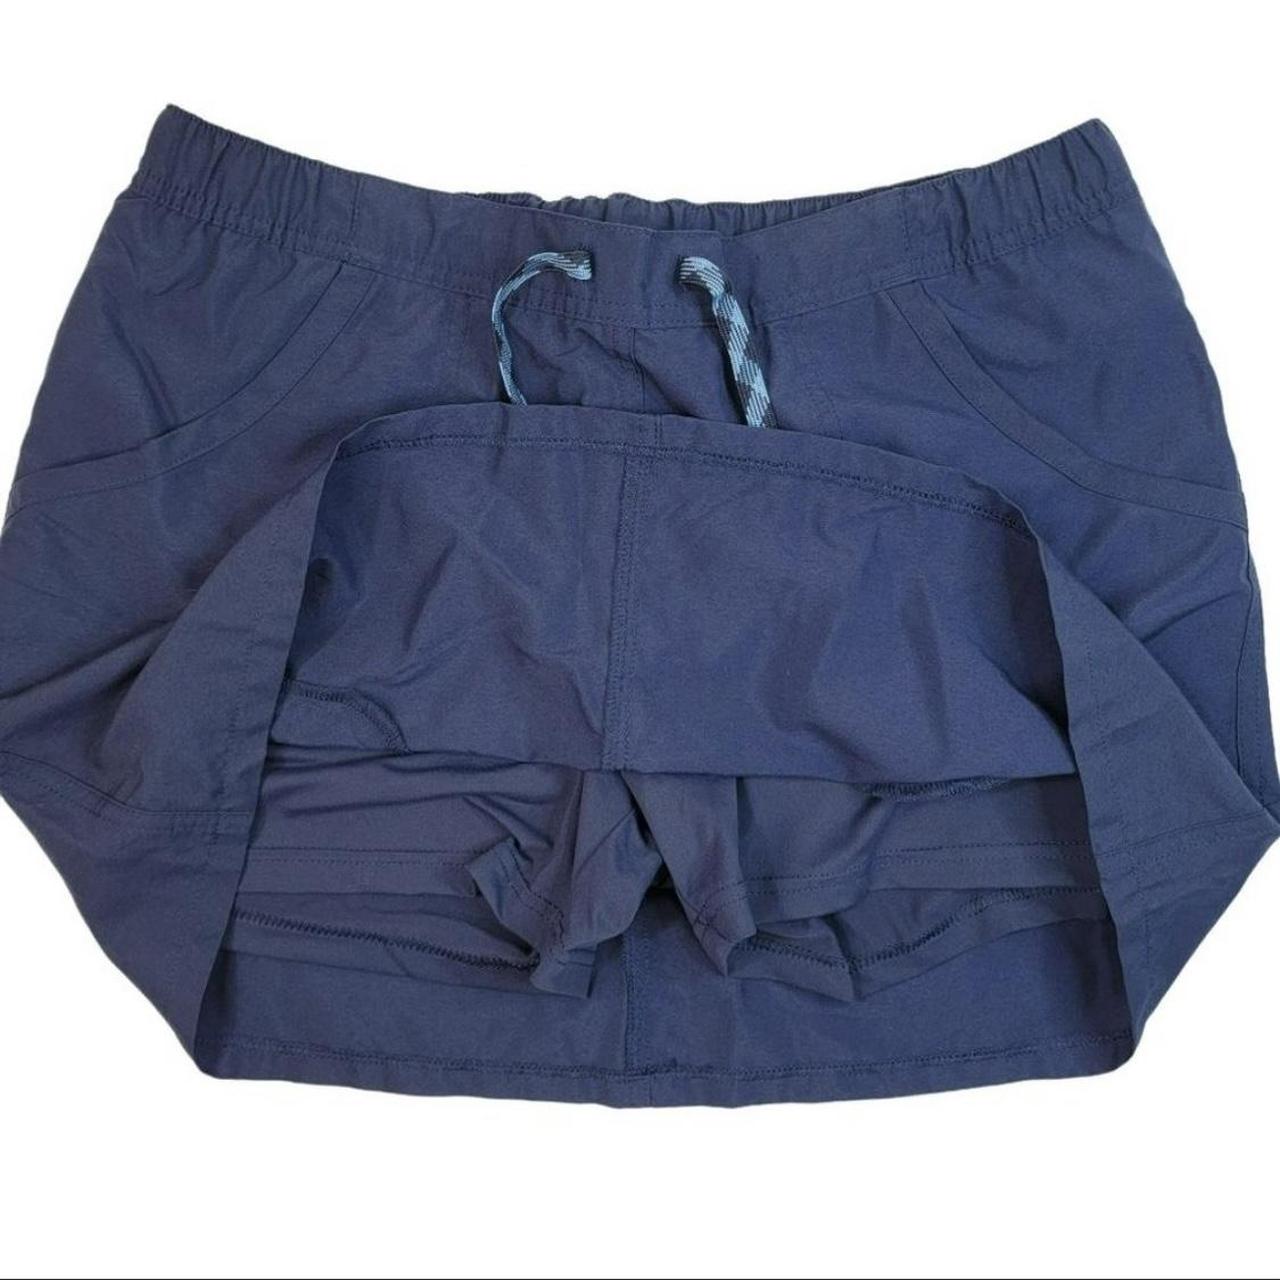 Product Image 3 - Decathlon by Quechua Womens Navy